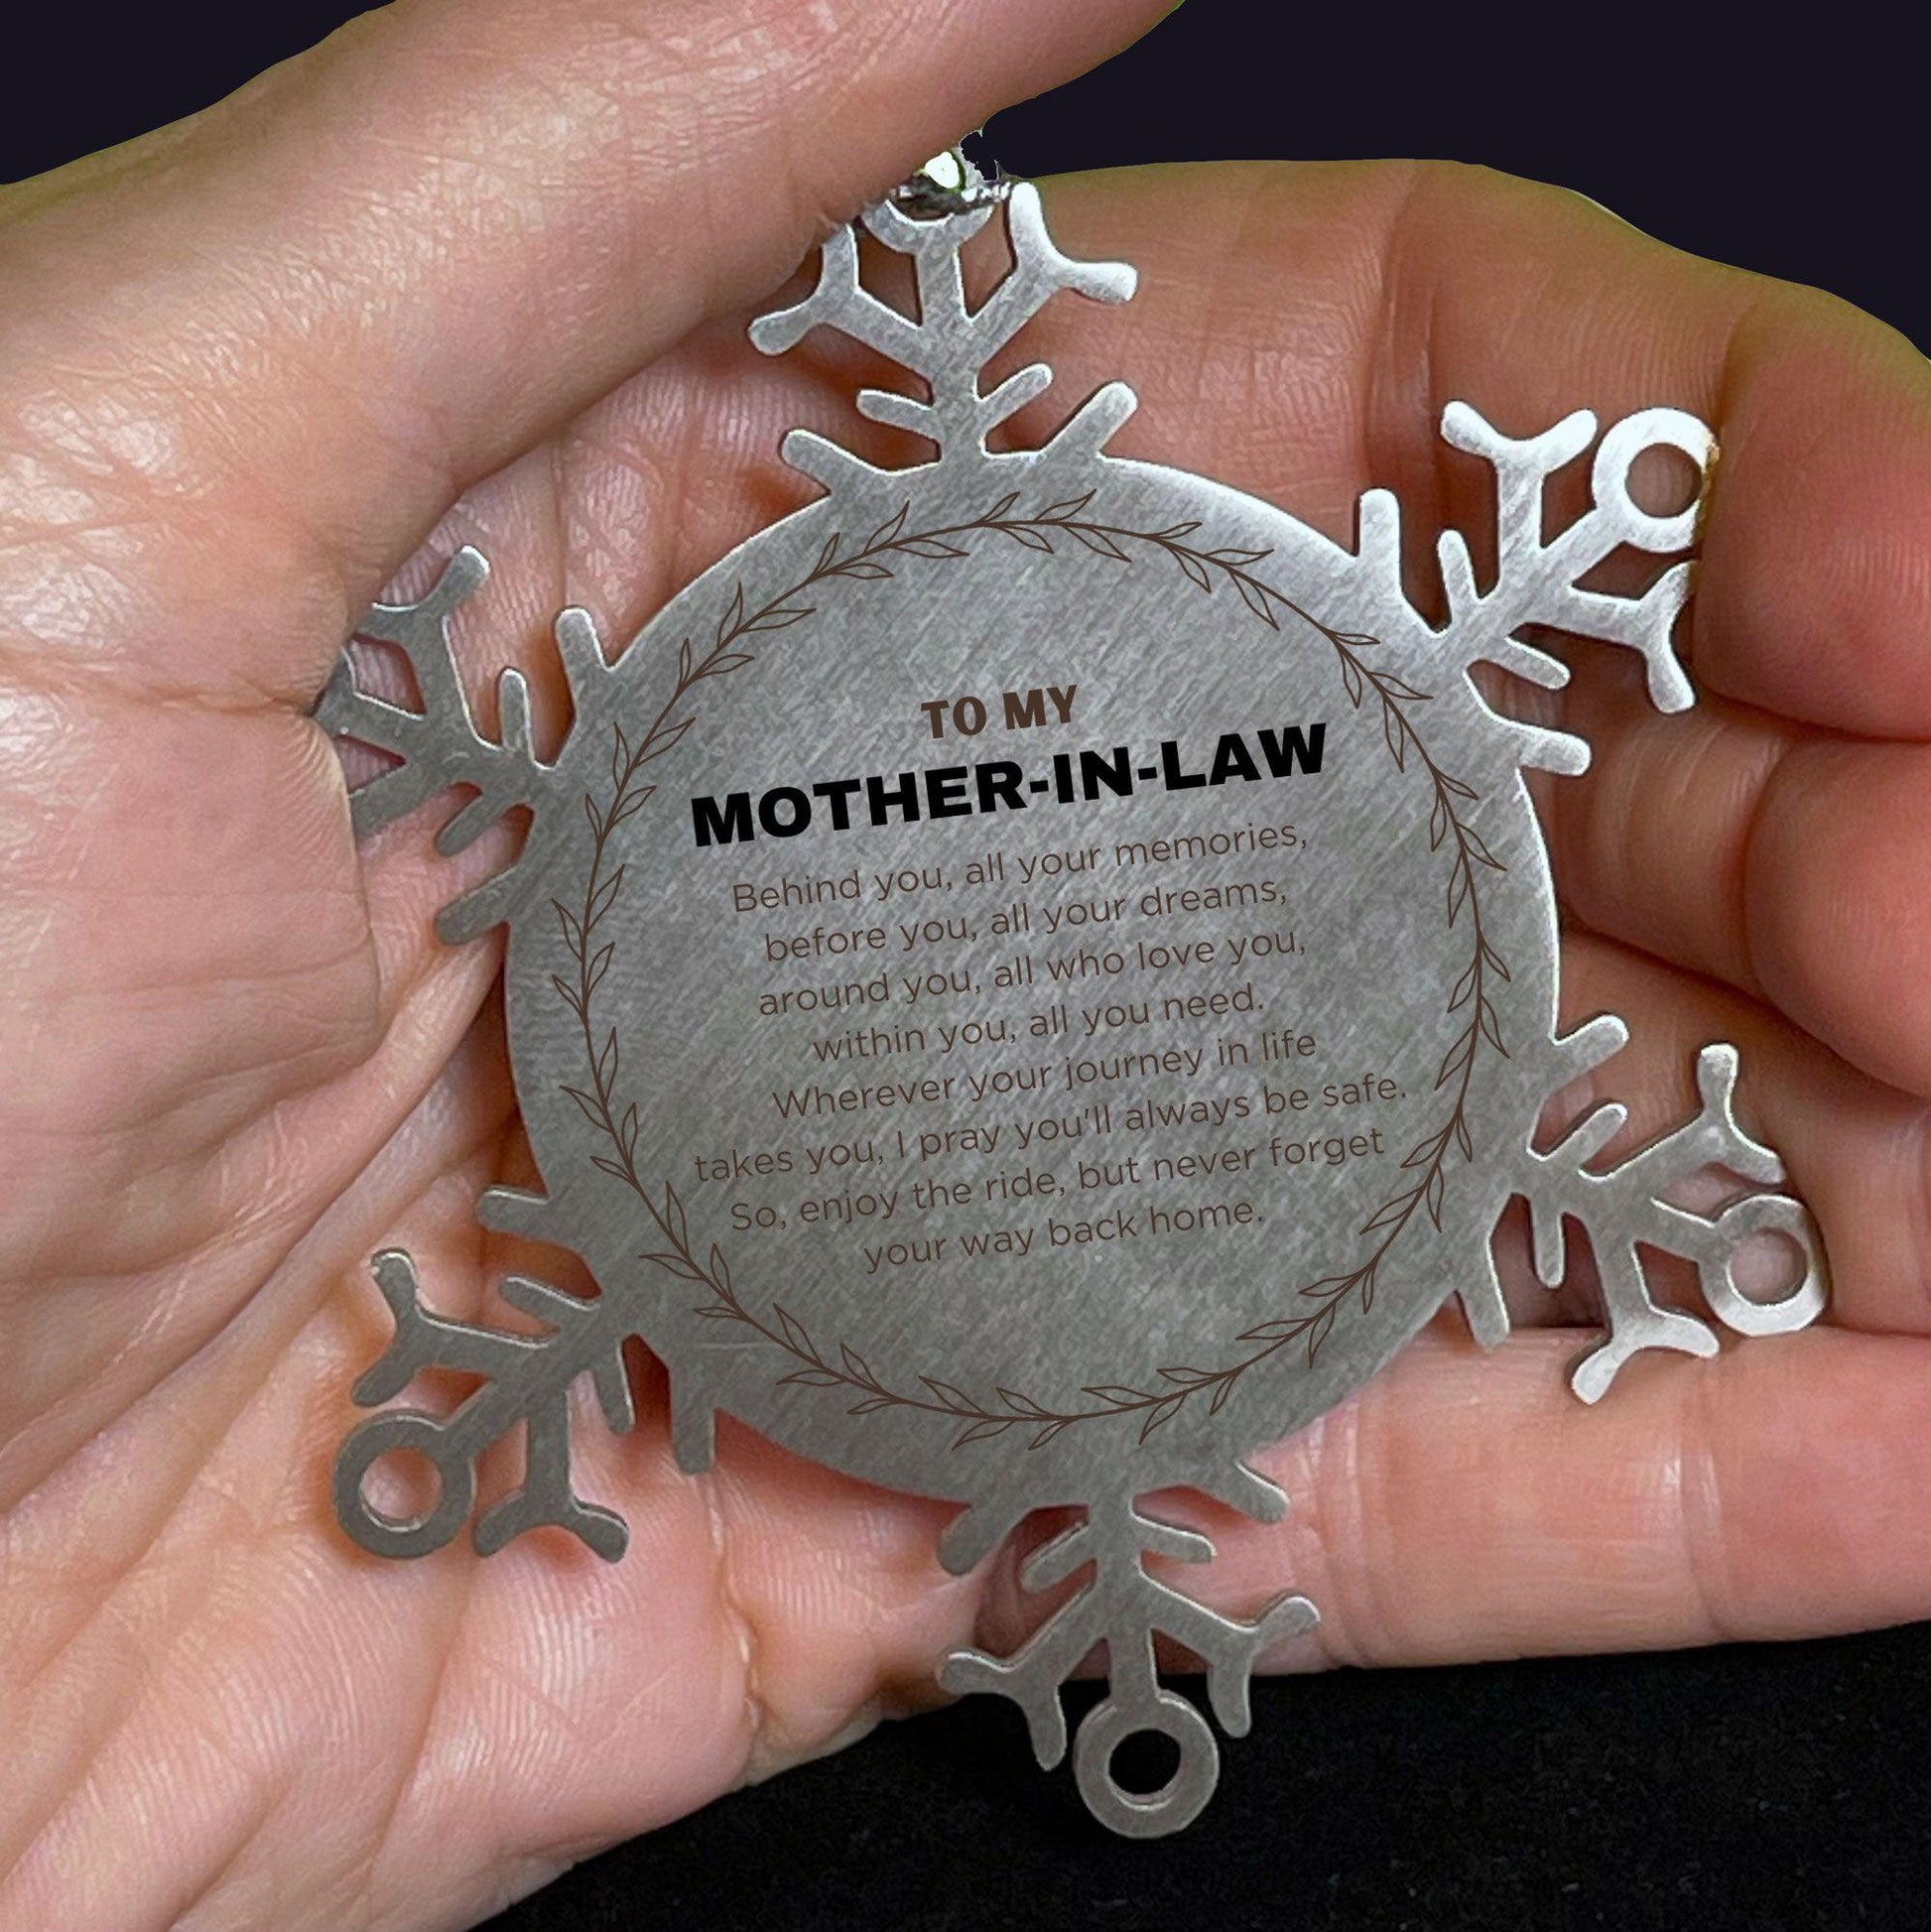 Inspirational Mother-In-Law Snowflake Ornament - Behind you, all your Memories, Before you, all your Dreams - Birthday, Christmas Holiday Gifts - Mallard Moon Gift Shop